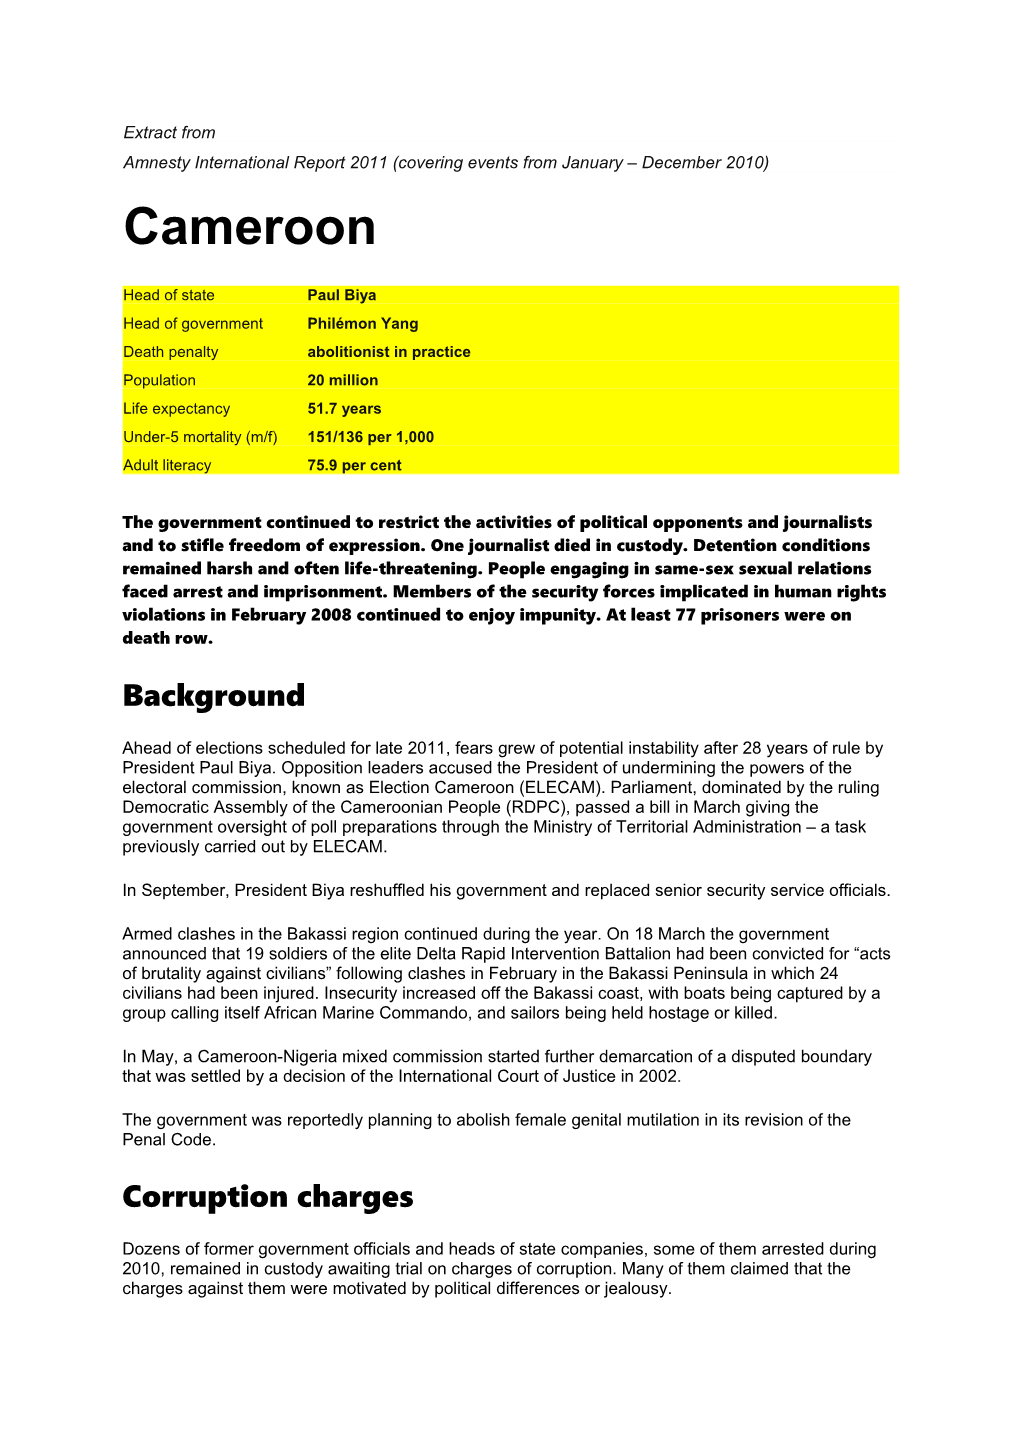 Amnesty International Report 2011 (Covering Events from January December 2010)